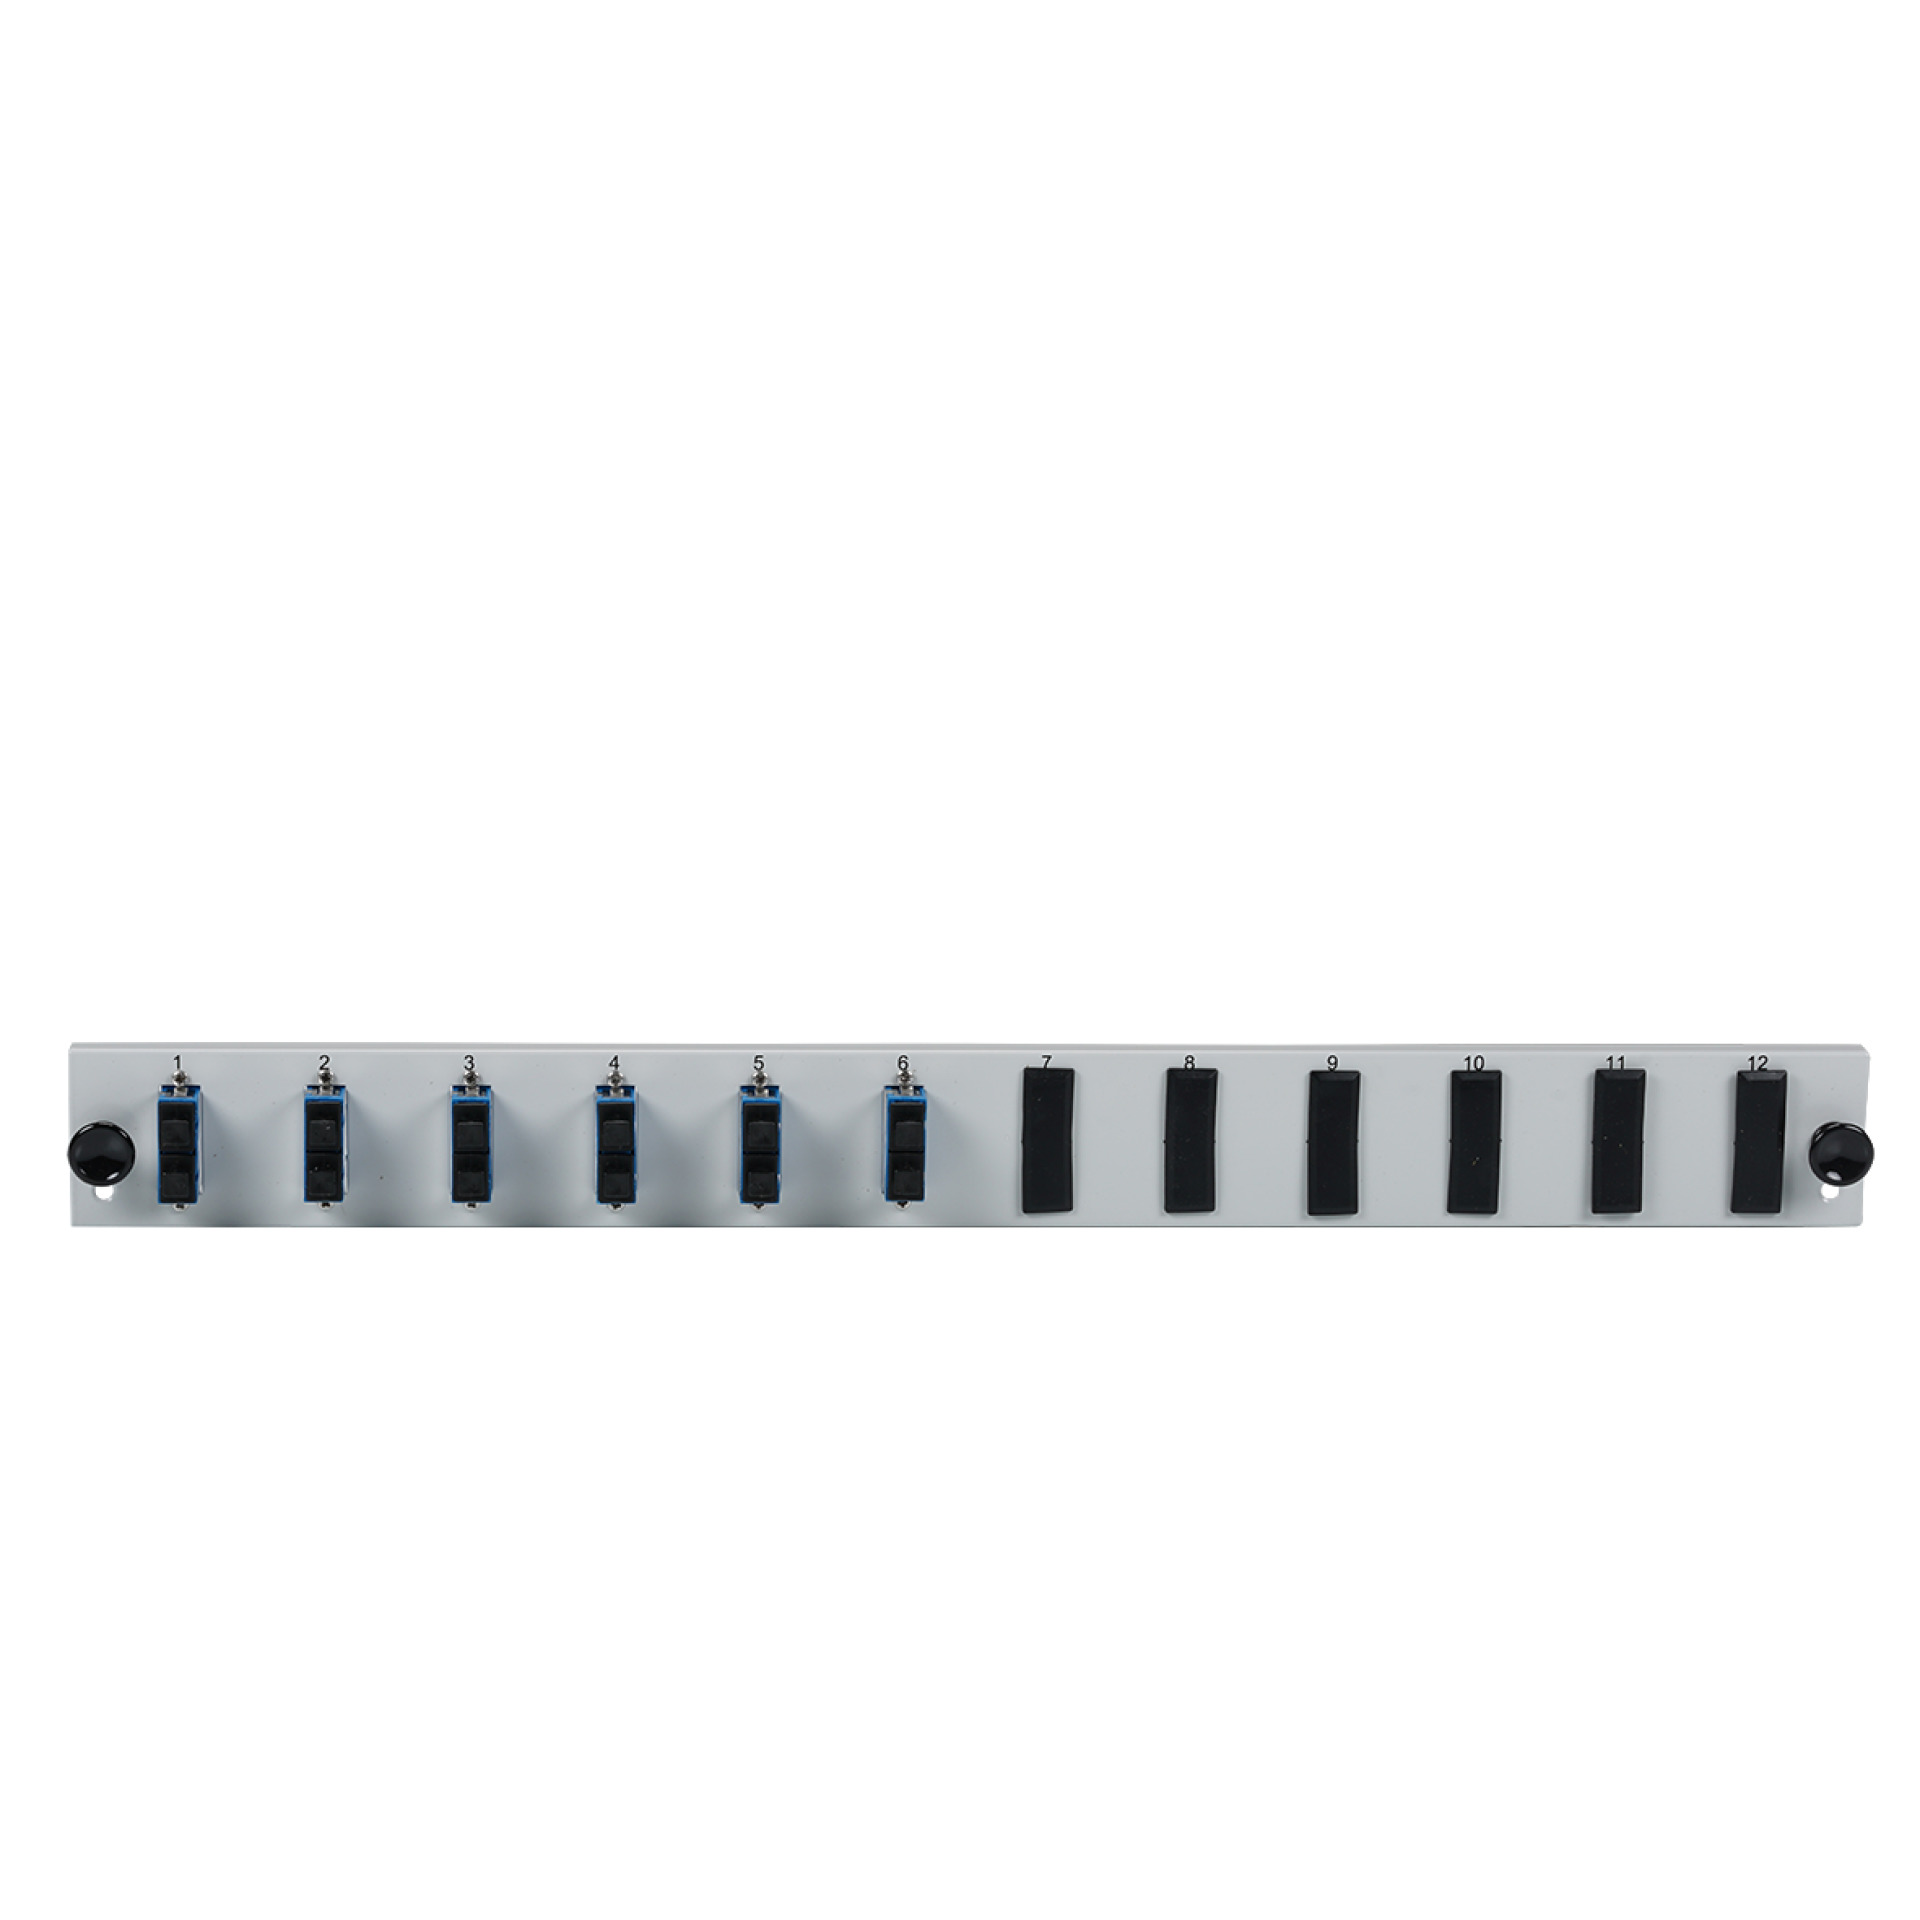 Equiped 12 Port Front Panel with 6x Duplex adapter OS2 vertical, black